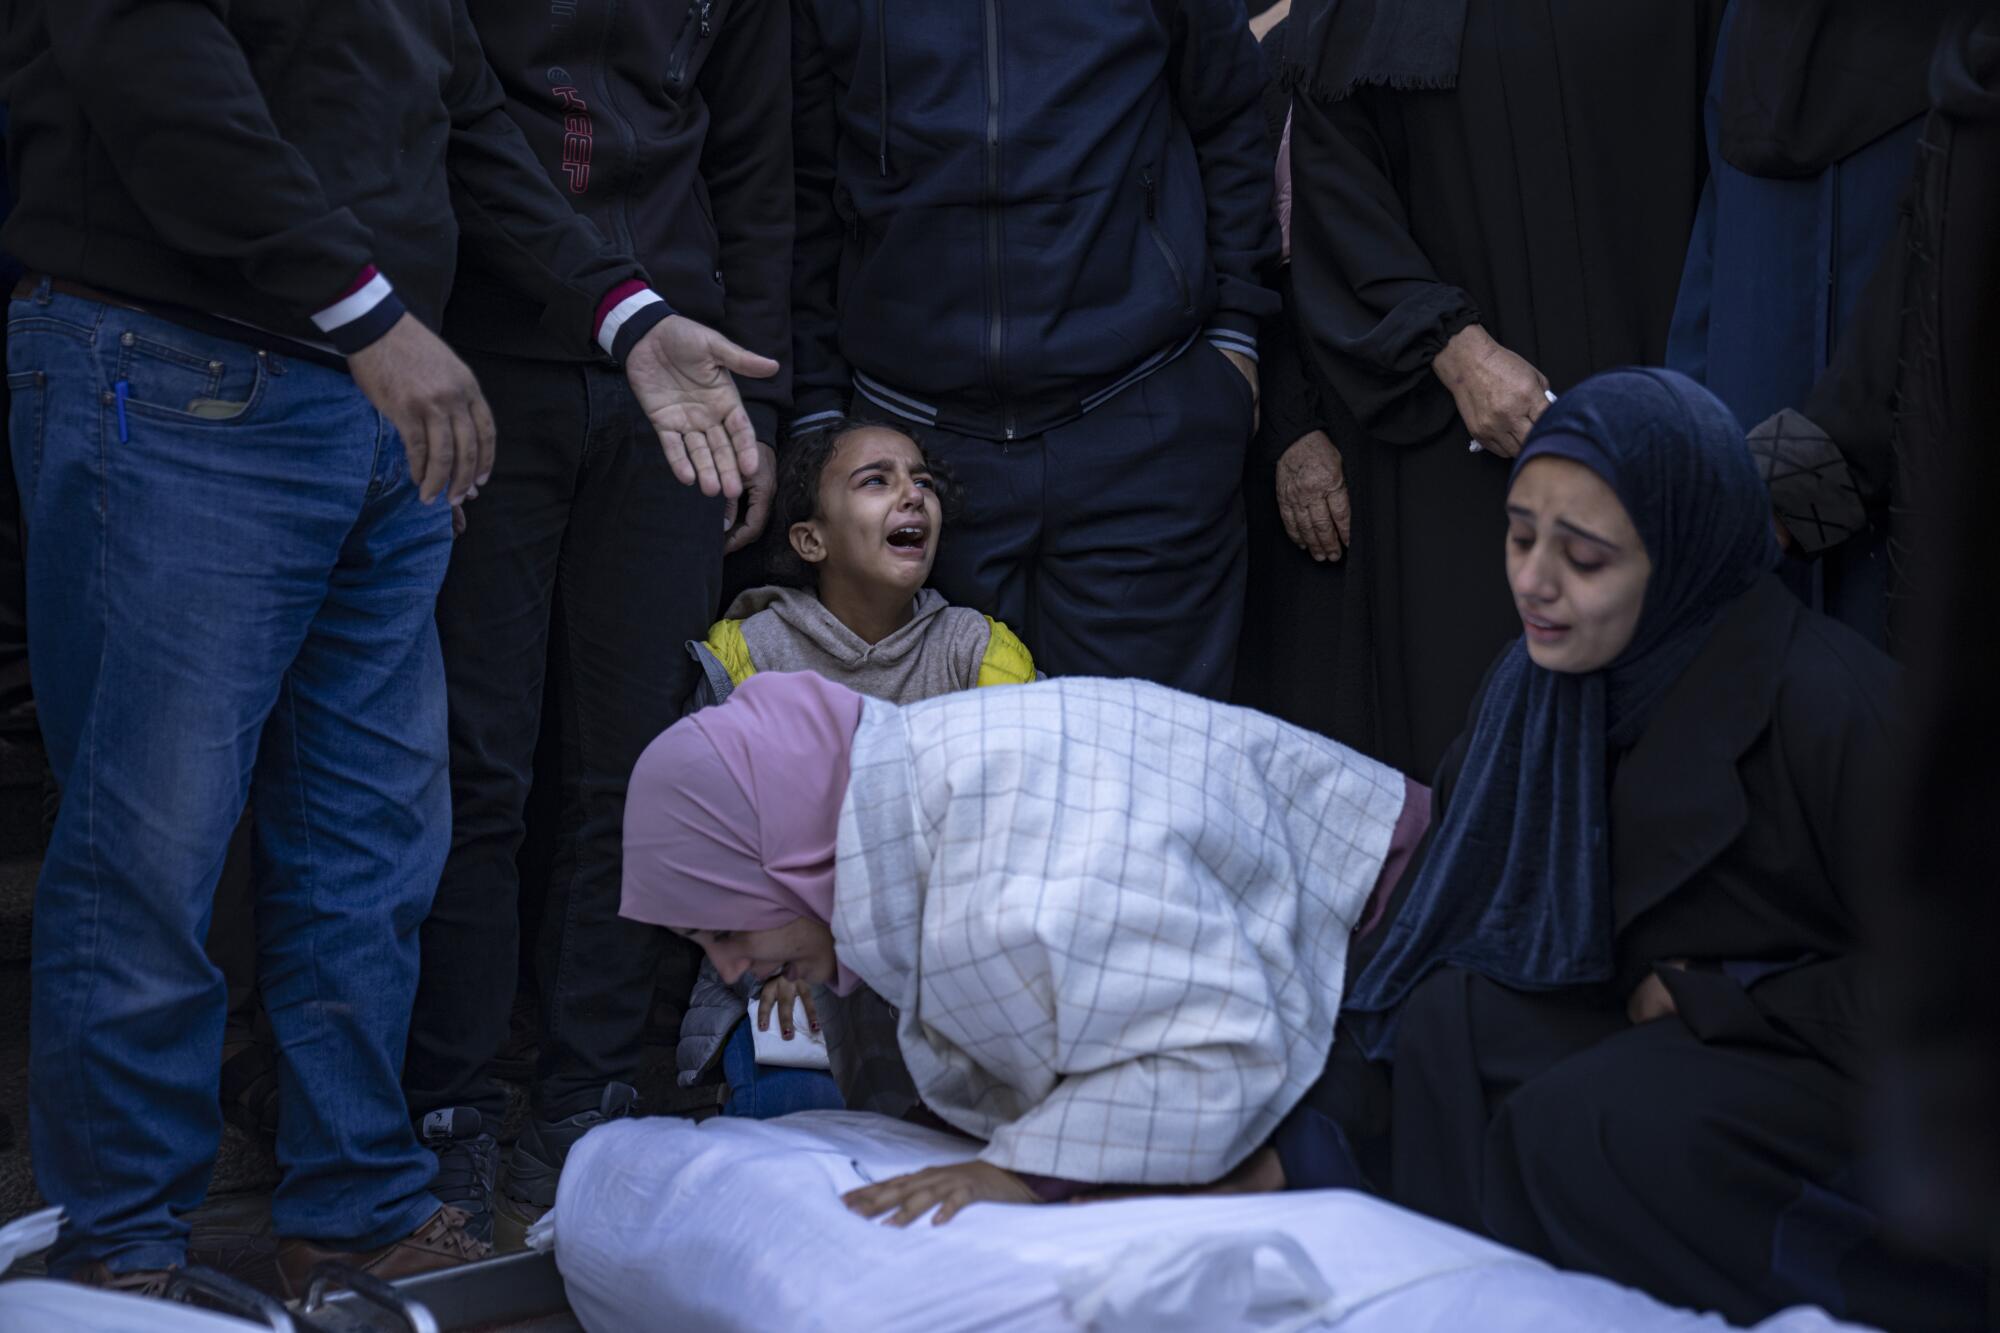 Palestinian women and a child weep next to a shrouded body.